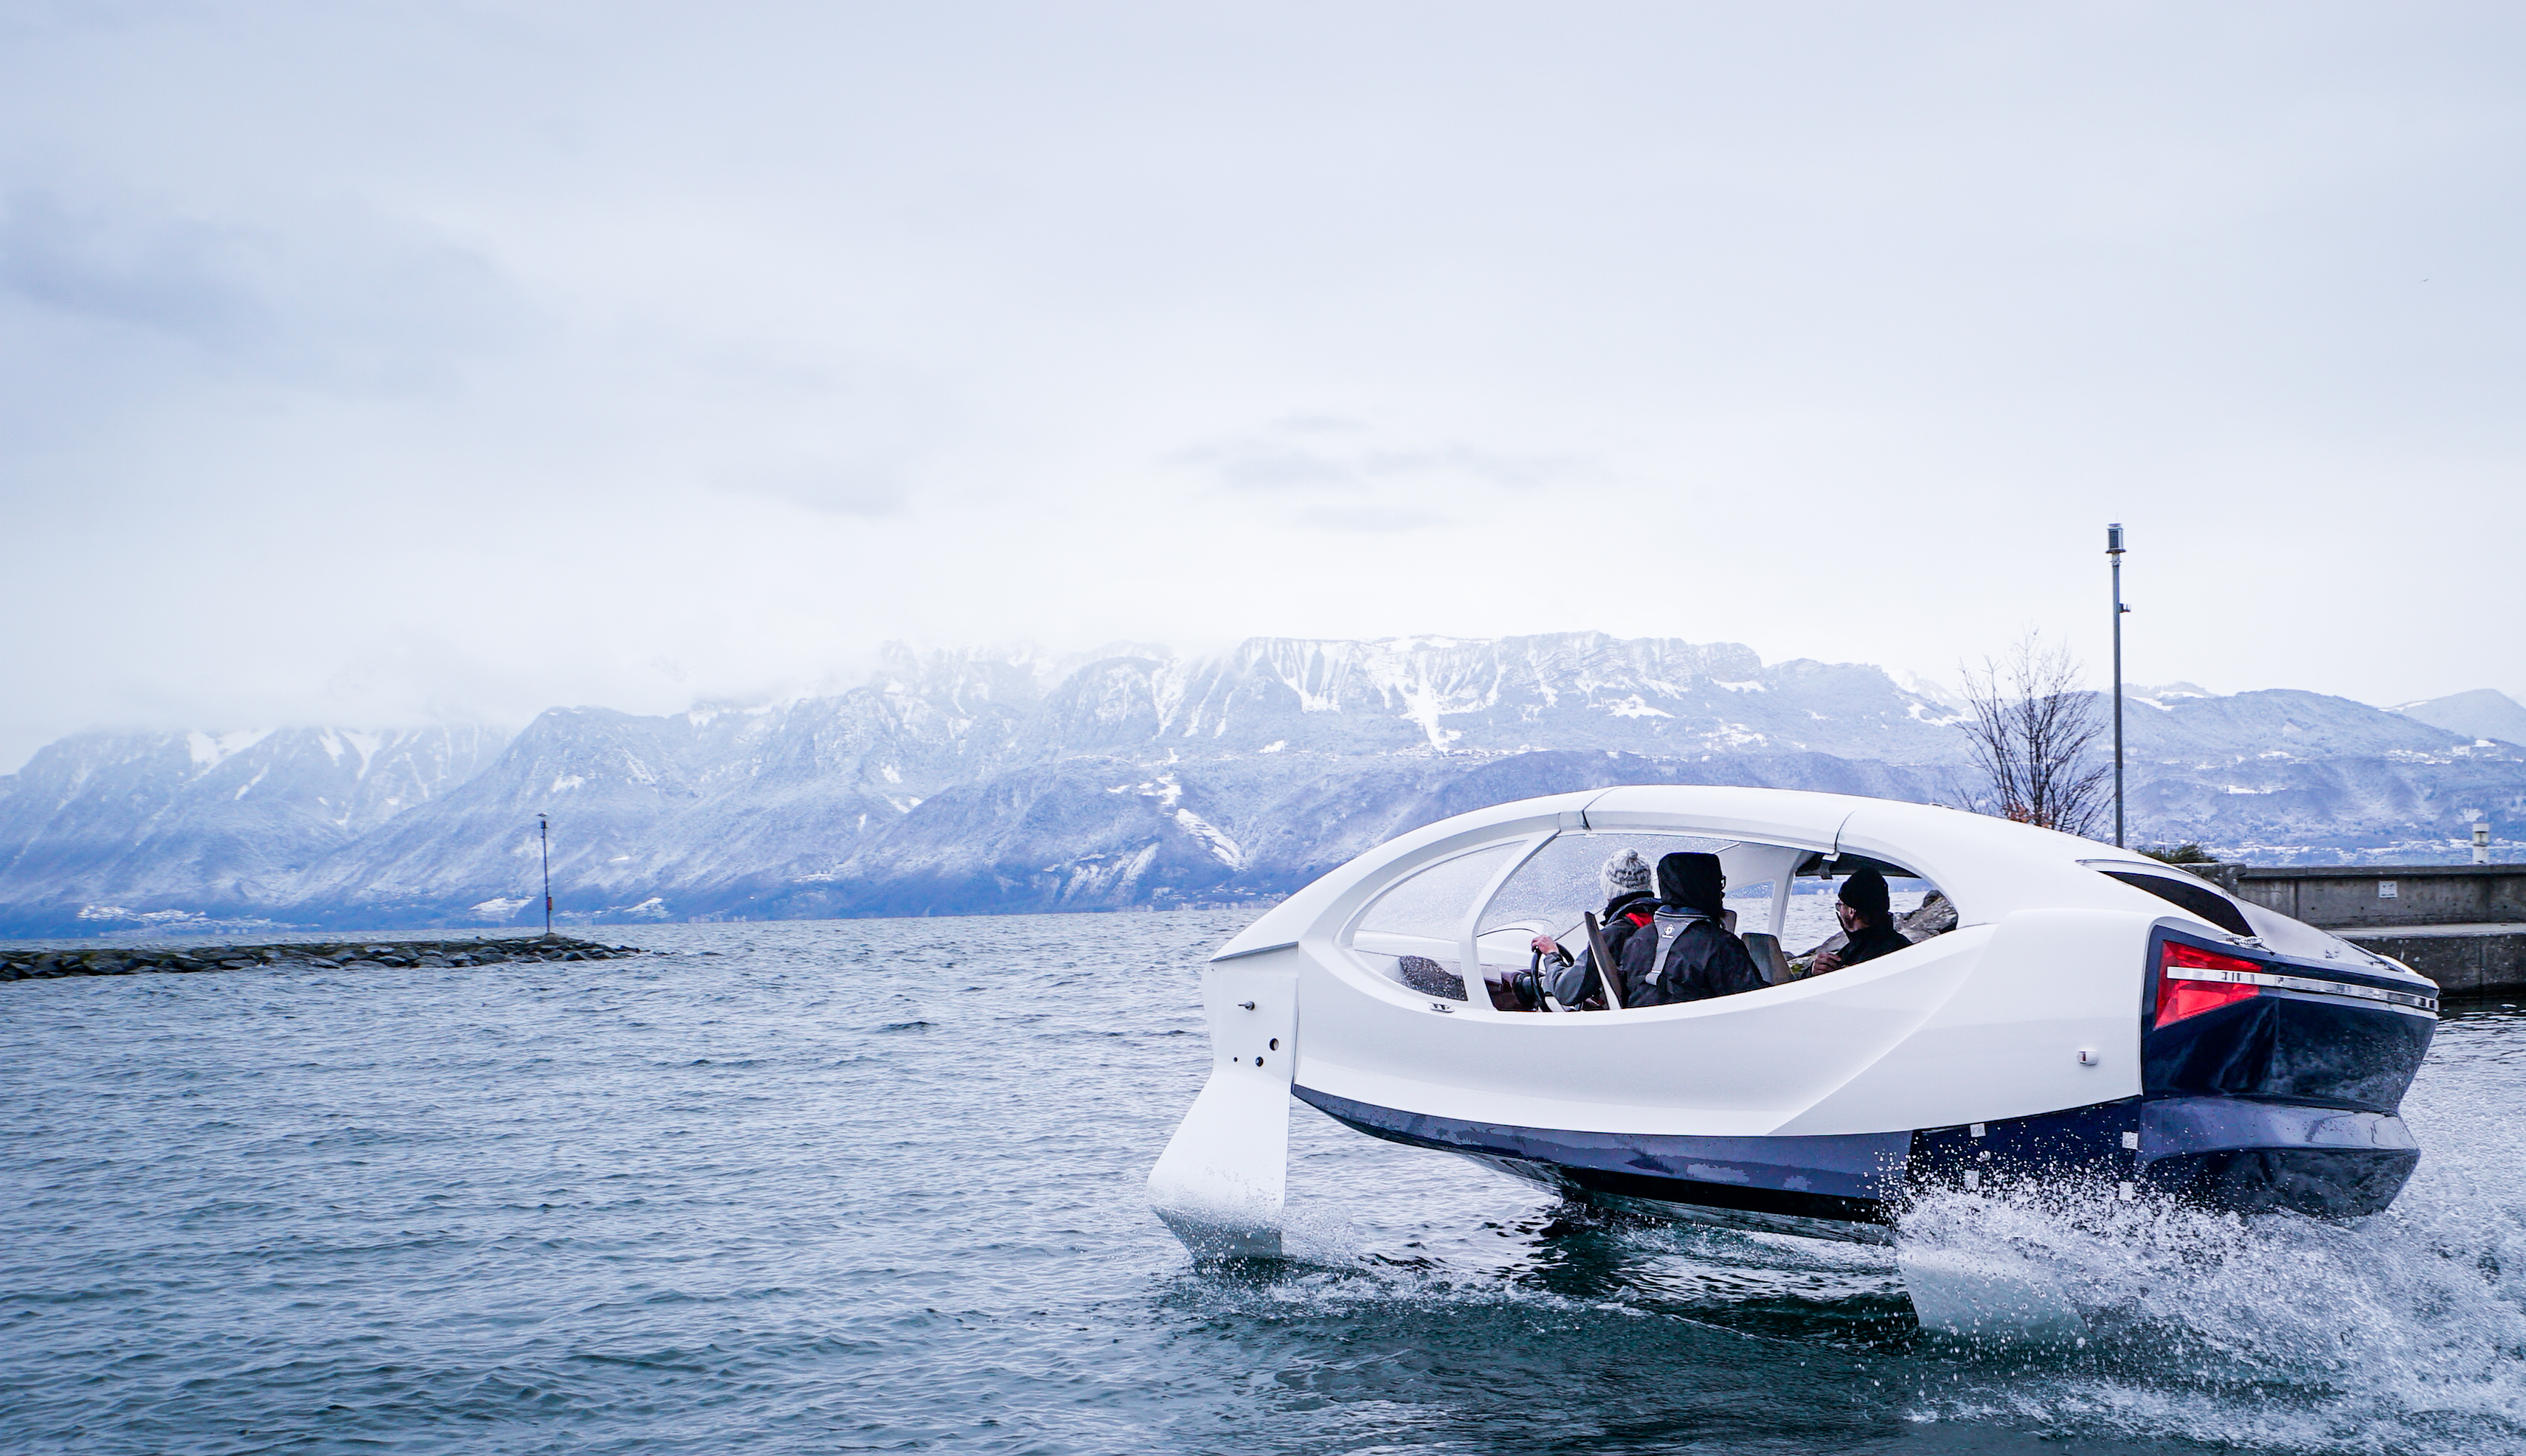 The entry covers the application of InfuGreen 810 bio resin in the production of the SeaBubbles water taxis prototypes.